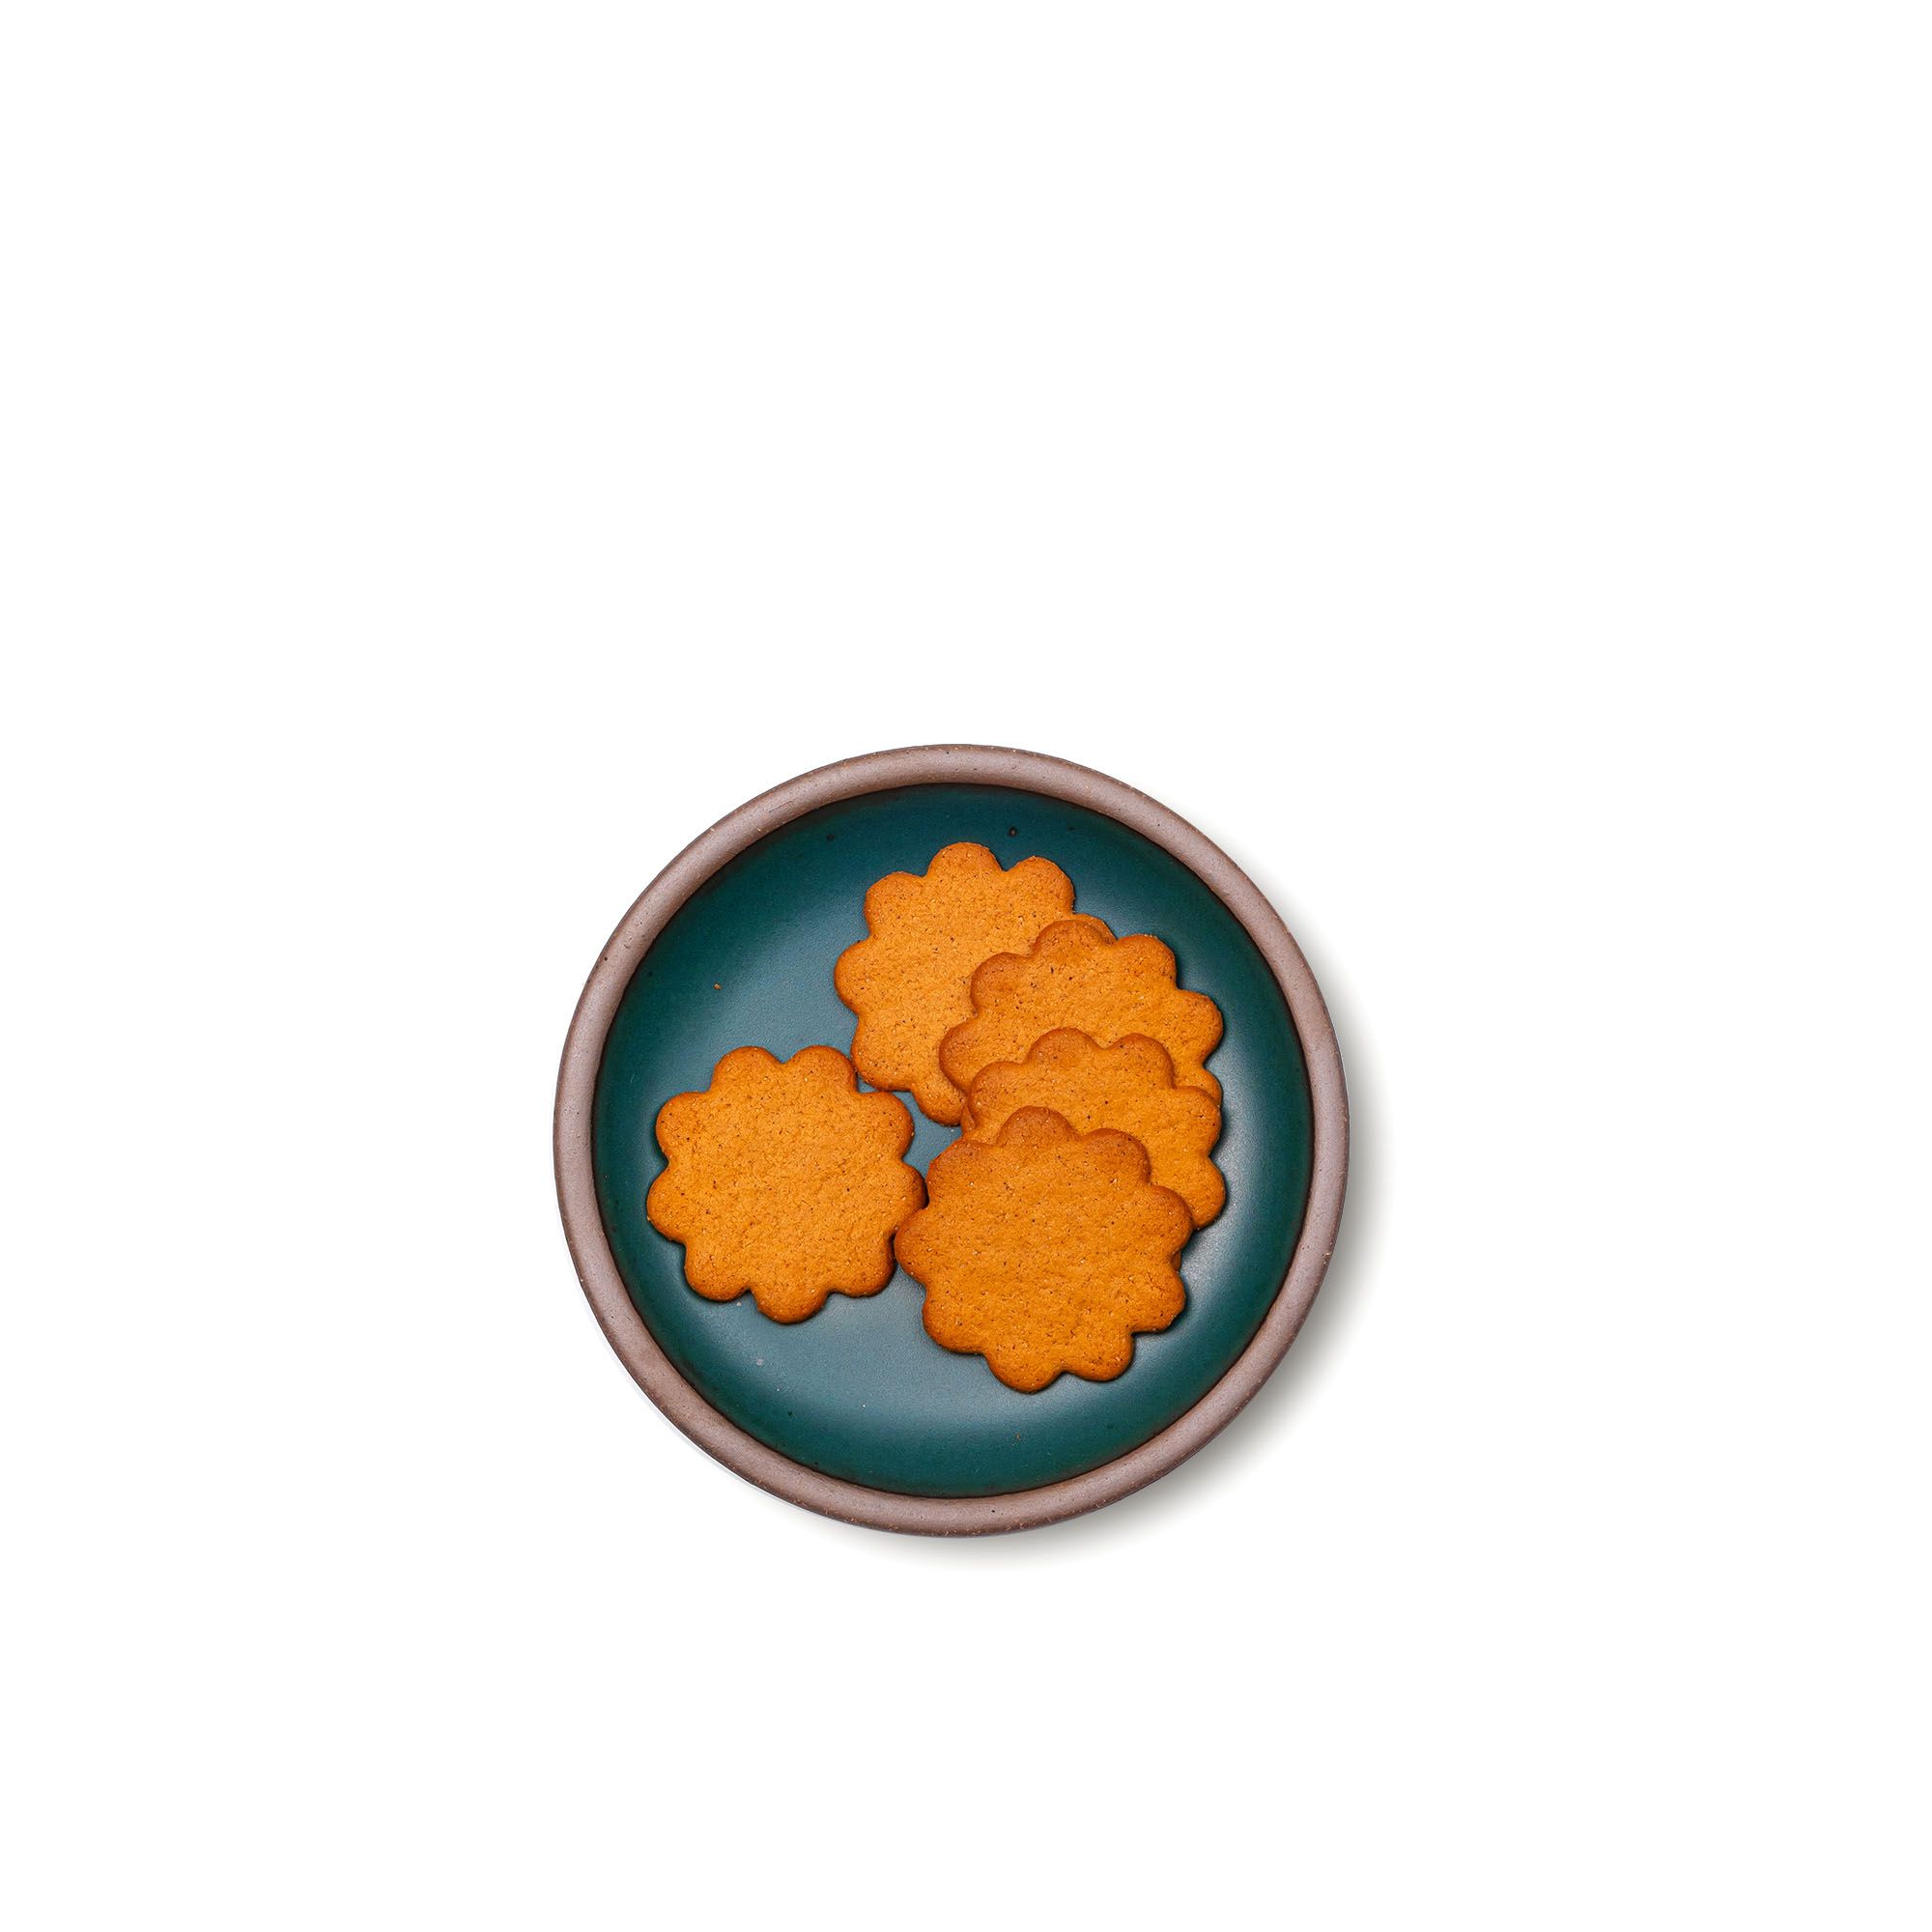 Cookies on a dessert sized ceramic plate in a deep dark teal color featuring iron speckles and an unglazed rim